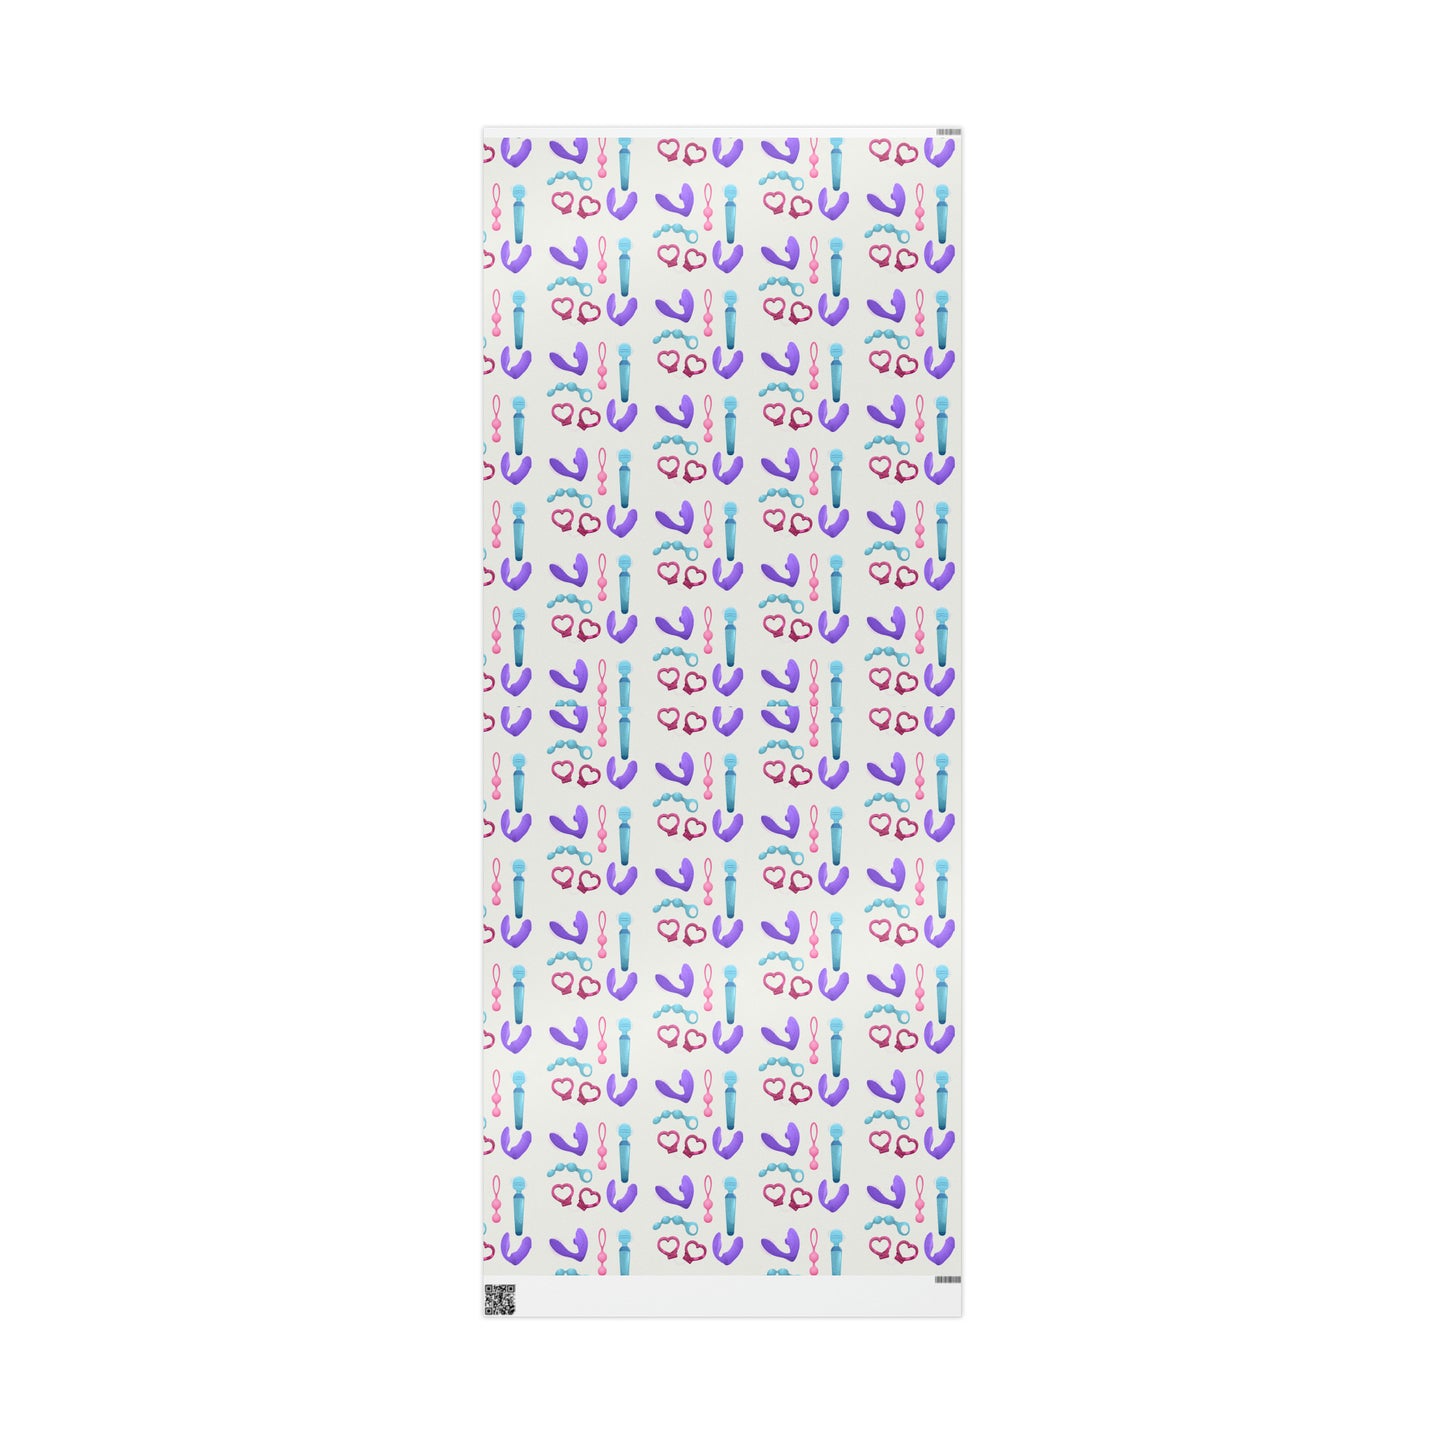 Bachelorette Party sex toy High Definition Happy Birthday gag Gift Present Wrapping Paper